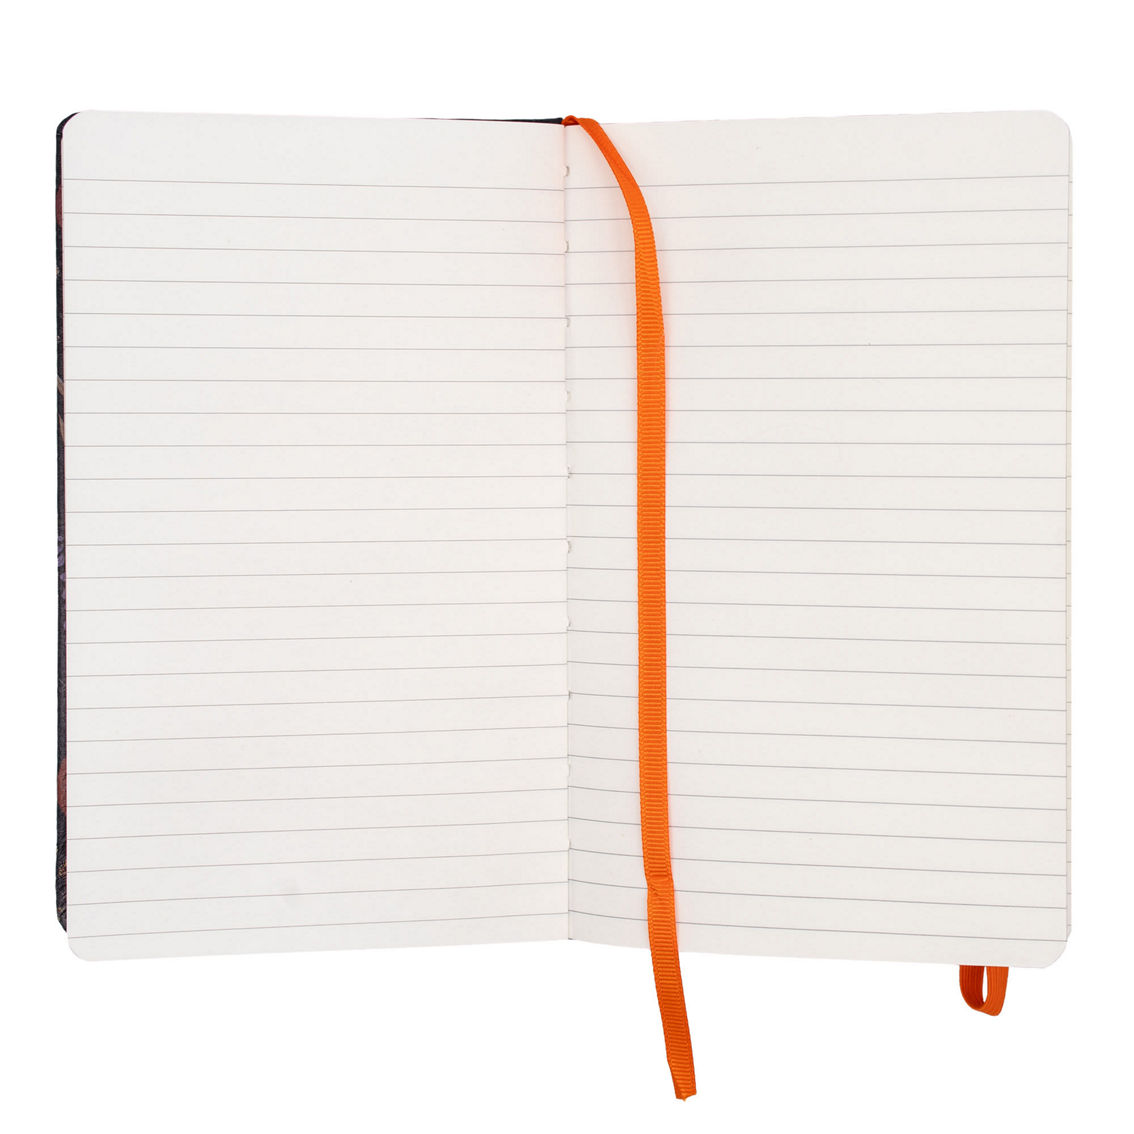 Pukka Pads Bloom Softcover Notebook with Pocket - Cream - Pack 3 - Image 3 of 5